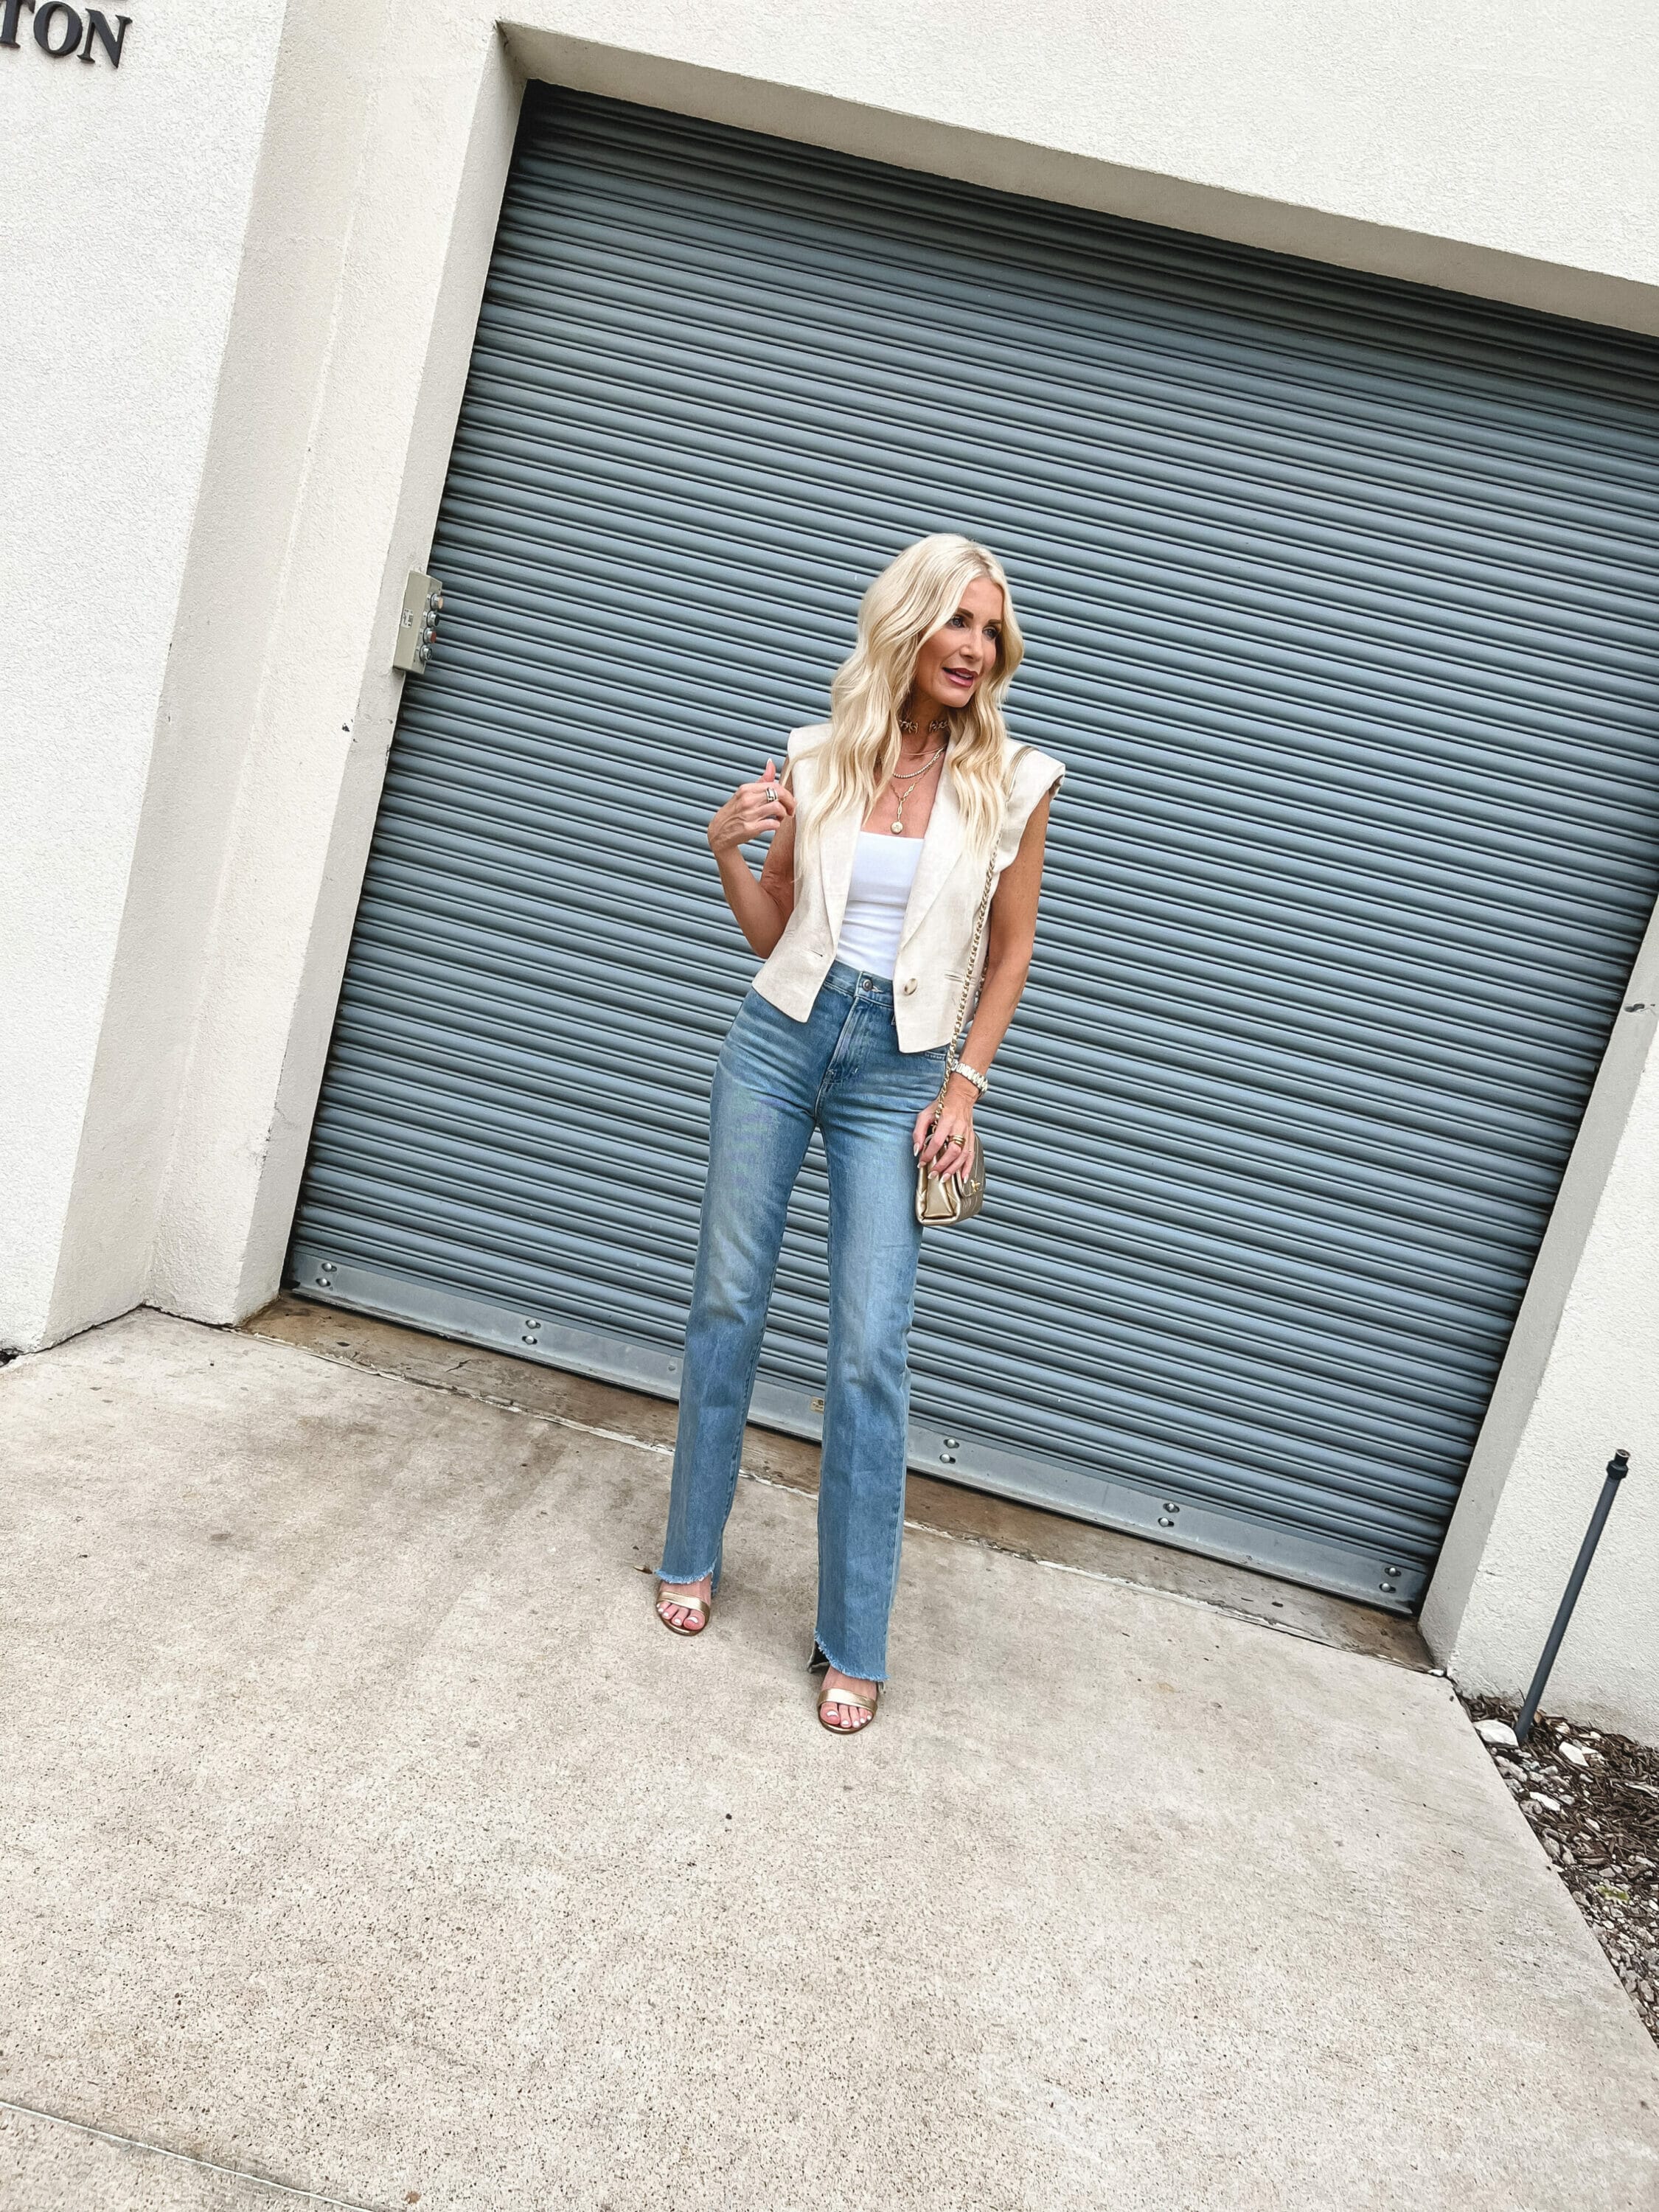 Over 40 fashion blogger from Dallas wearing a linen vest with a white bodysuit and straight leg jeans.